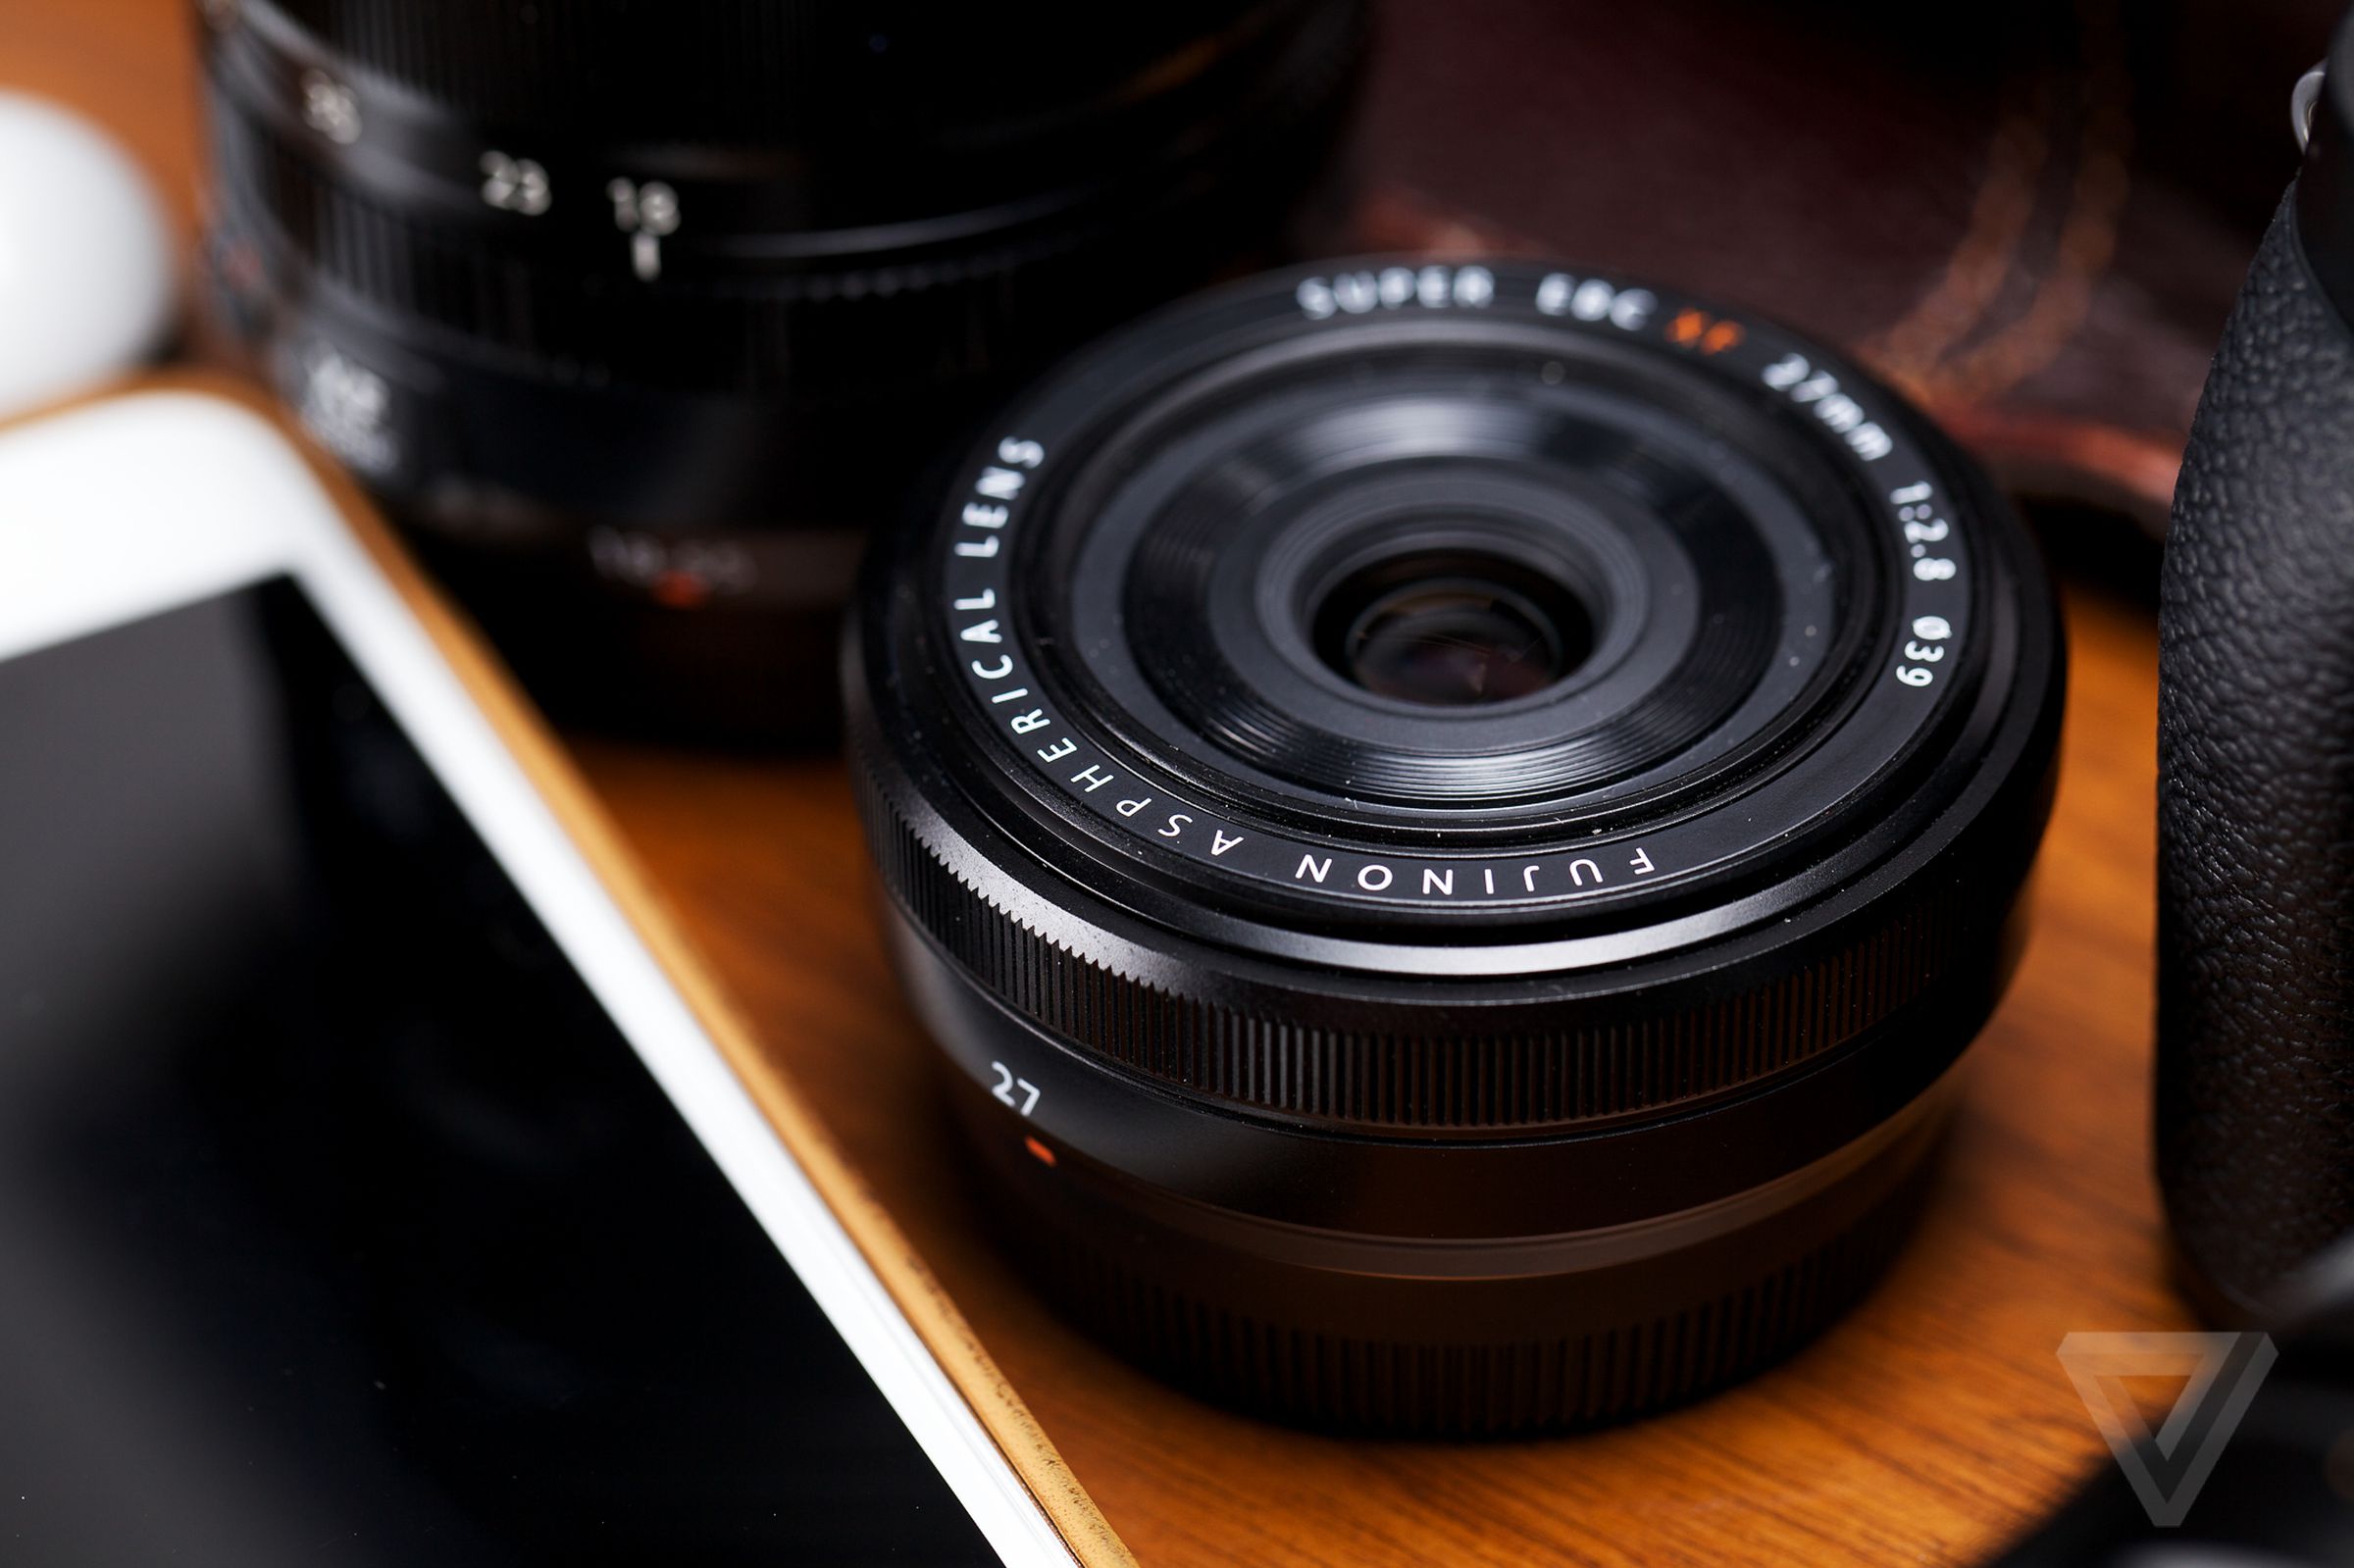 Fujifilm X-T1 pictures and sample shots